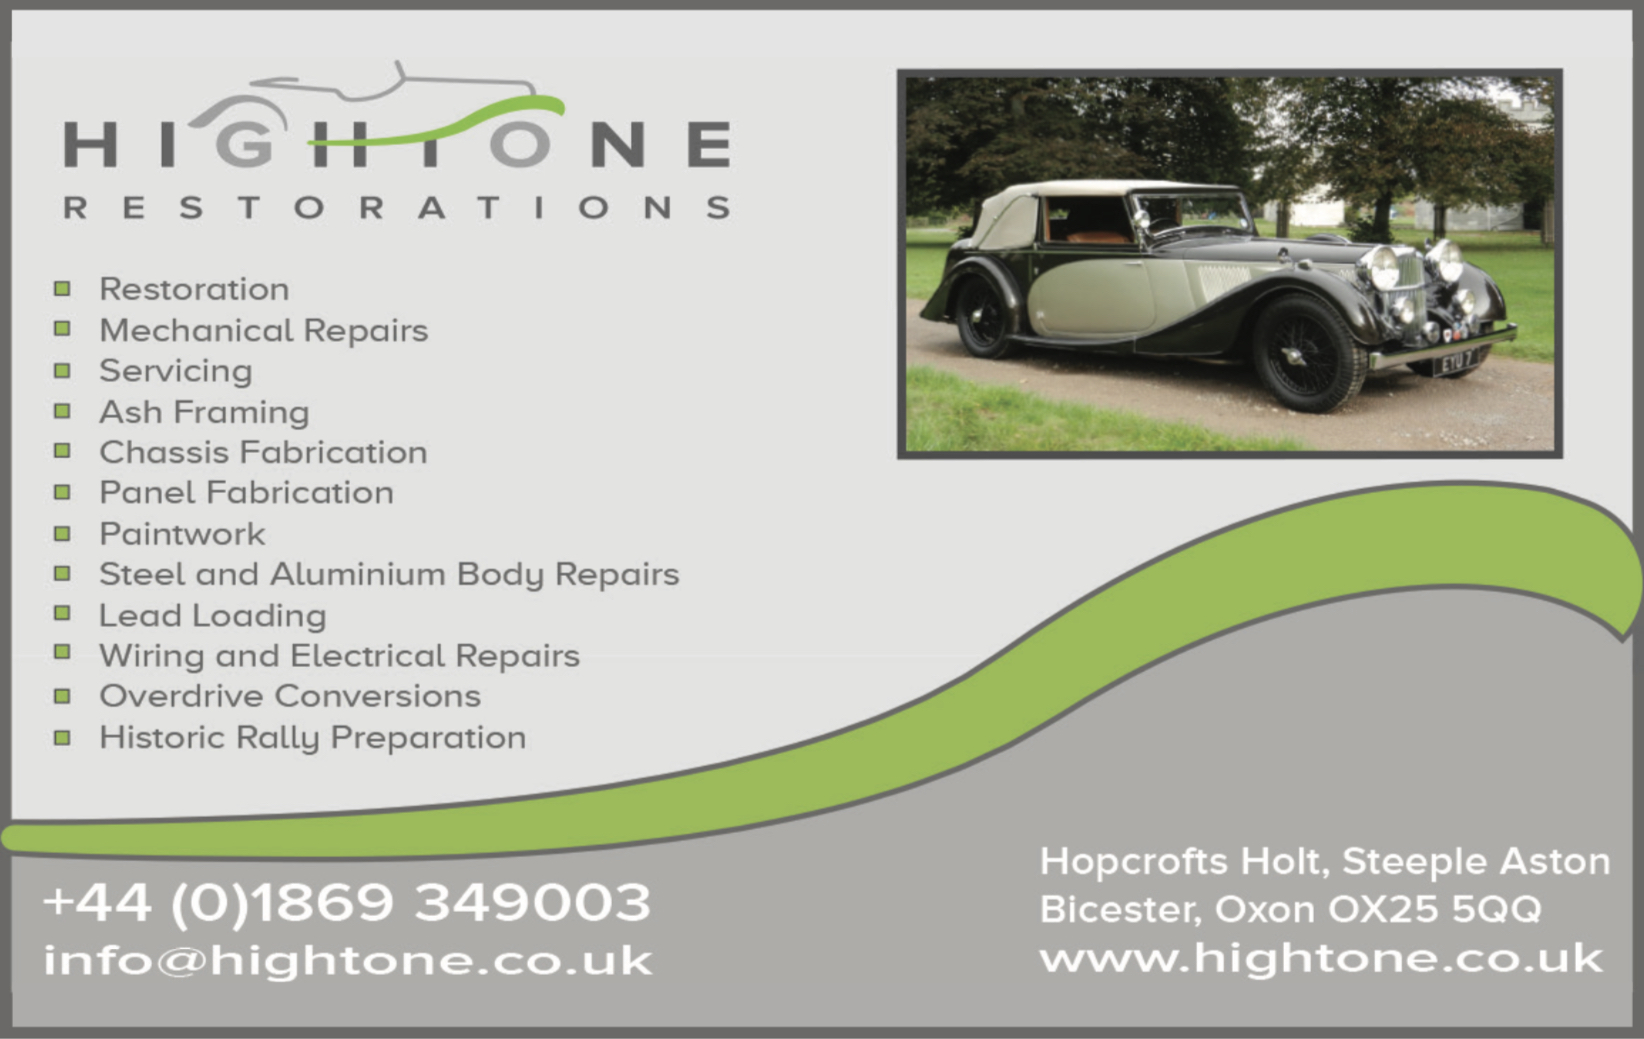 Hightone Restorations - Restoration Mechanical Repairs Servicing Ash Framing Chassis Fabrication Panel Fabrication Paintwork Steel and Aluminium Body Repairs Lead Loading Wiring and Electrical Repairs, Overdrive Conversions,